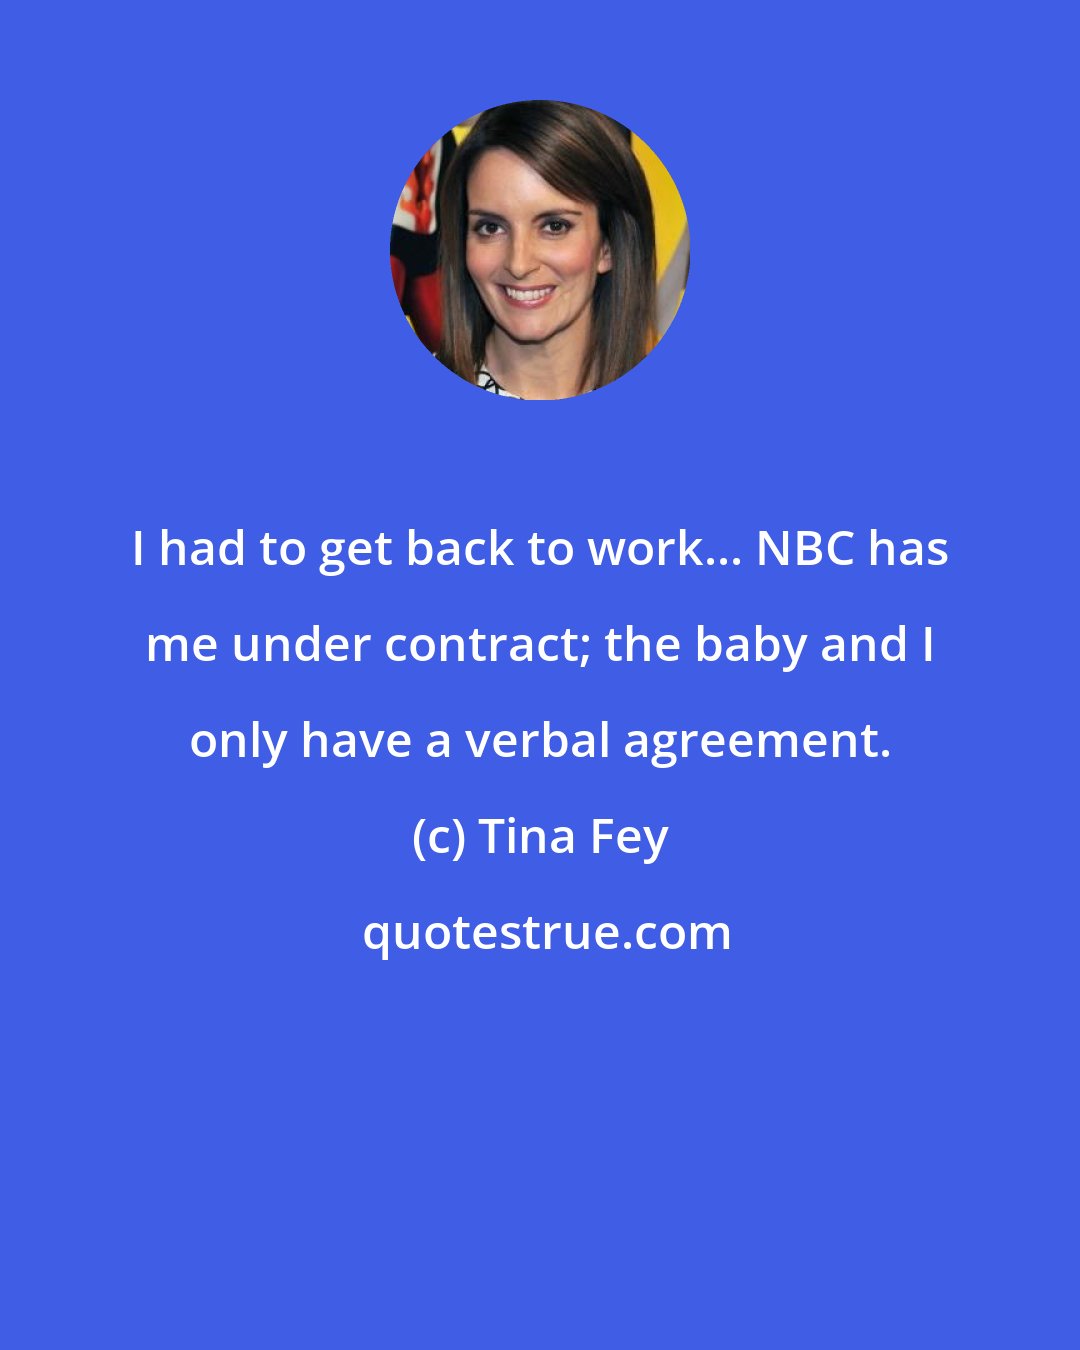 Tina Fey: I had to get back to work... NBC has me under contract; the baby and I only have a verbal agreement.